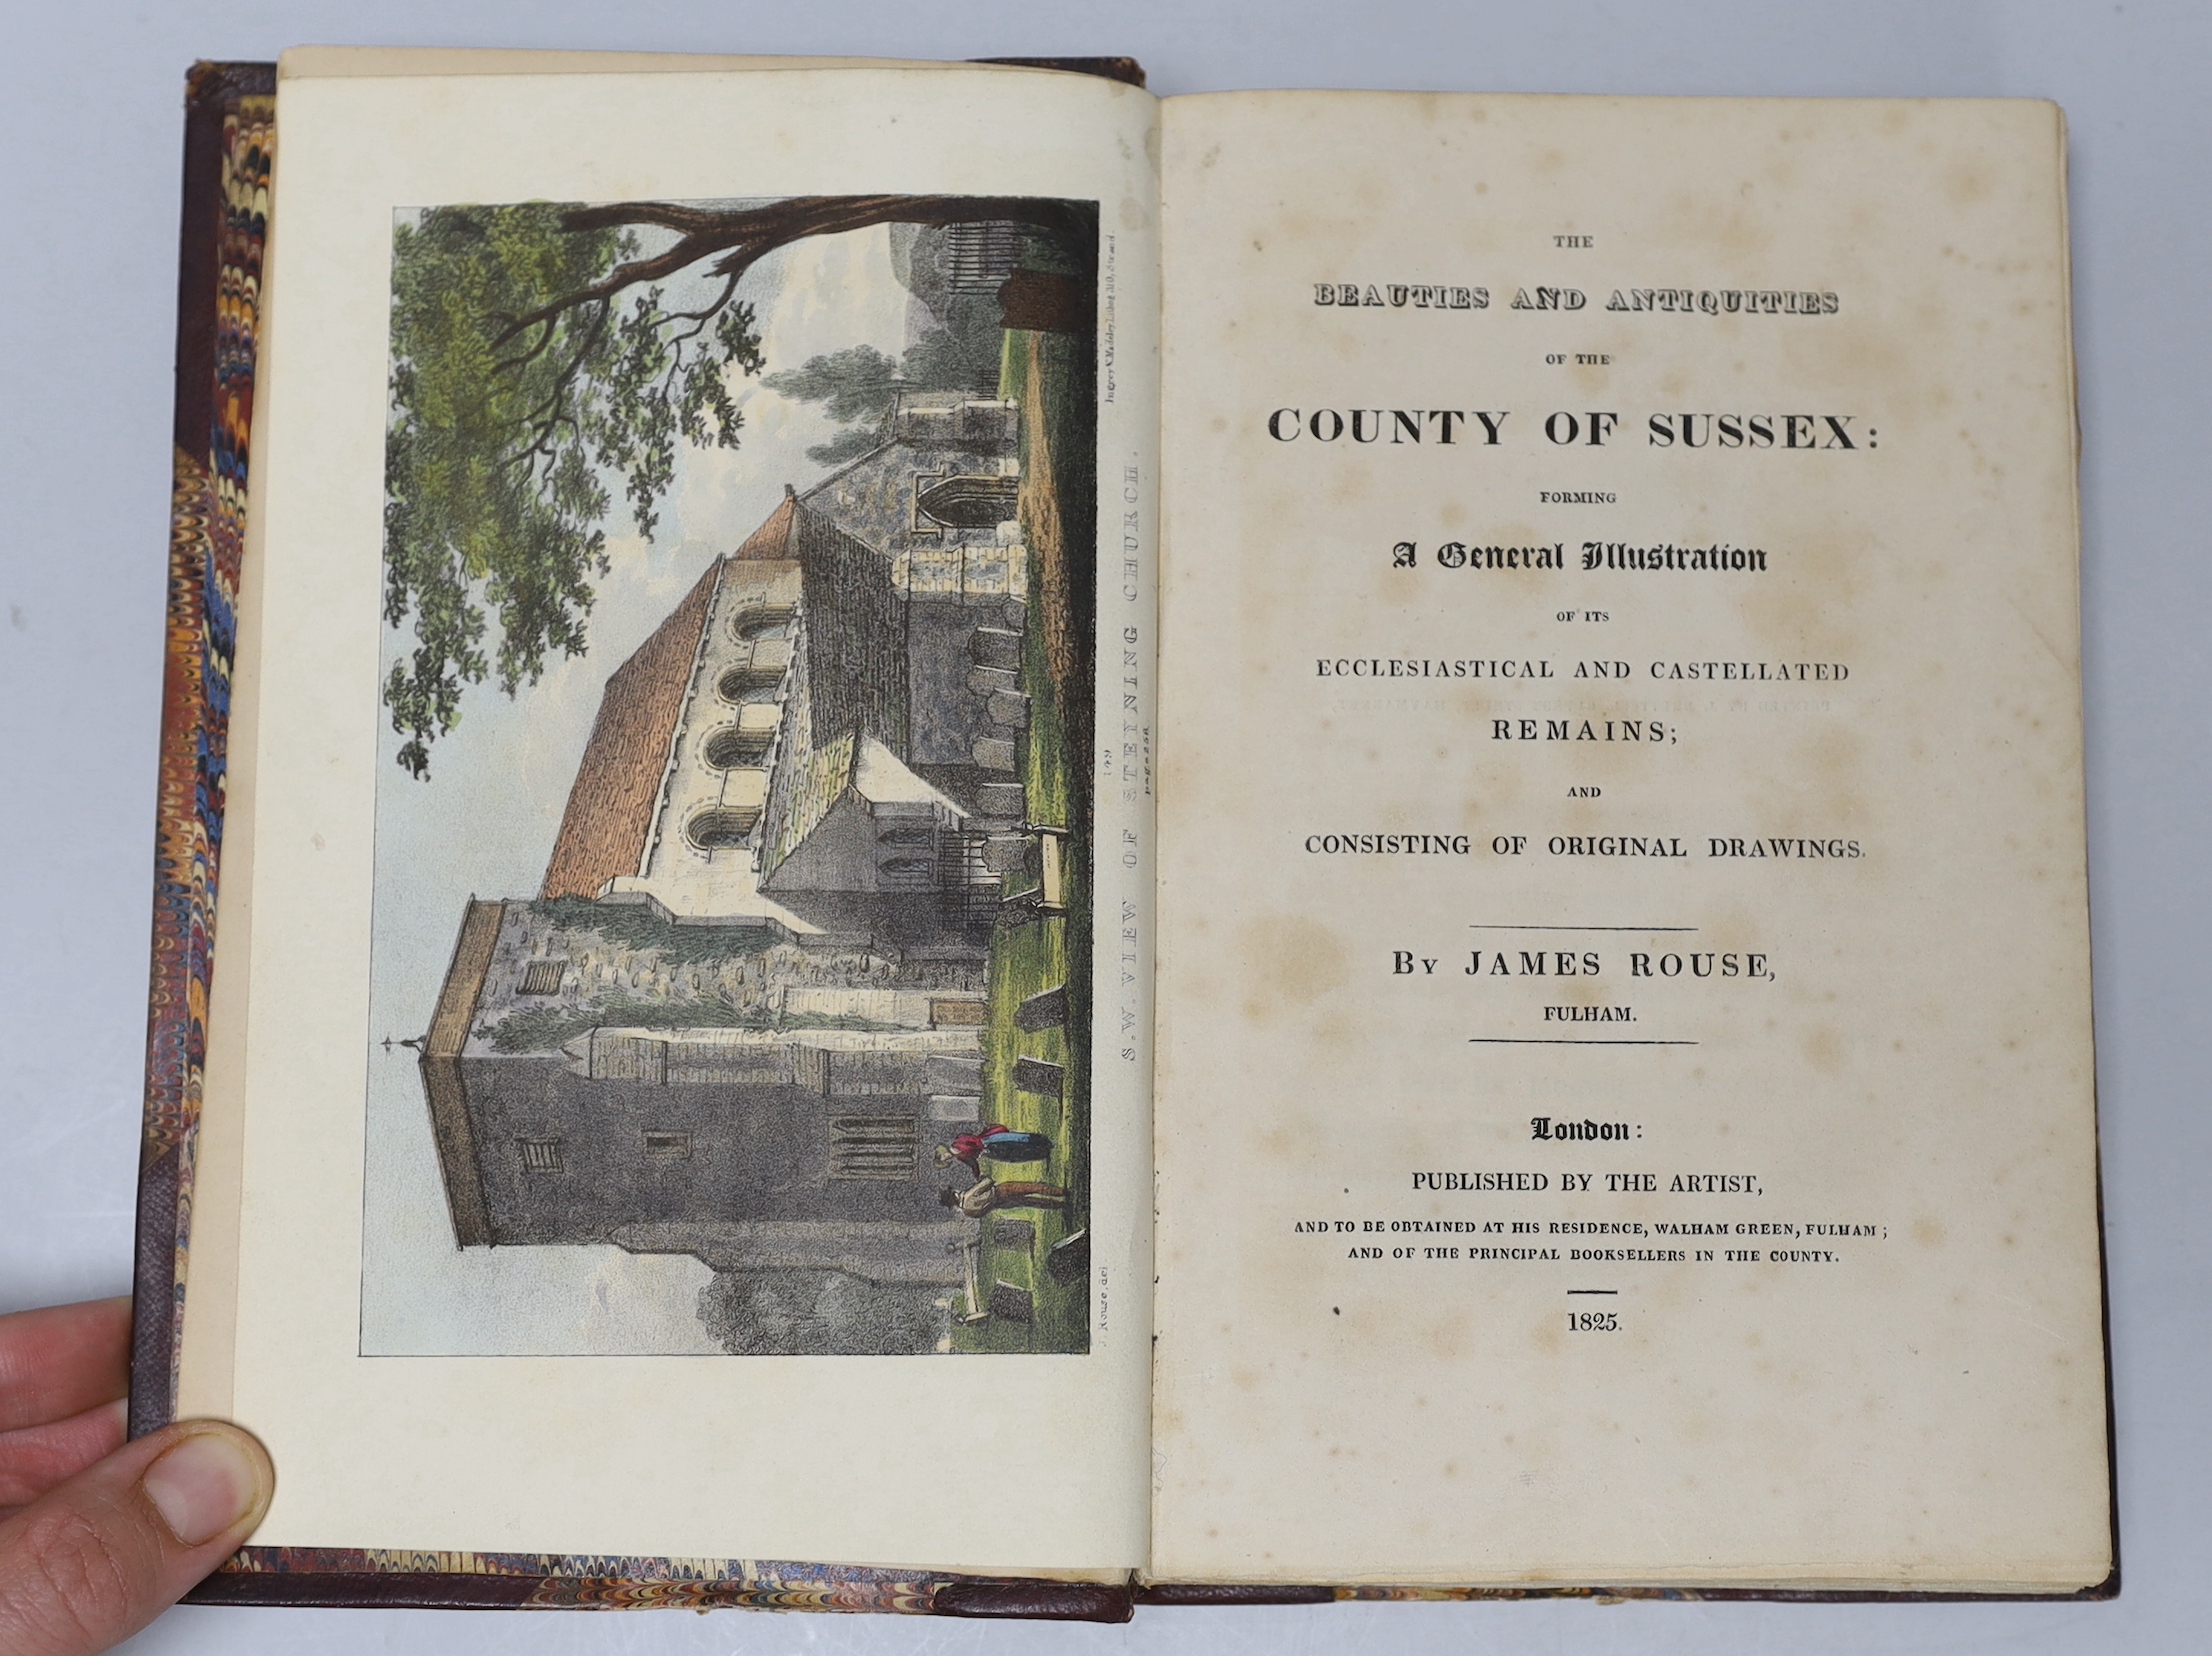 SUSSEX - Rouse, James - The Beauties and Antiquities of the County of Sussex forming a General Illustration of its Ecclesiastical and Castellated Remains, 2 vols, 8vo, half calf, with coloured lithographic plates, by the